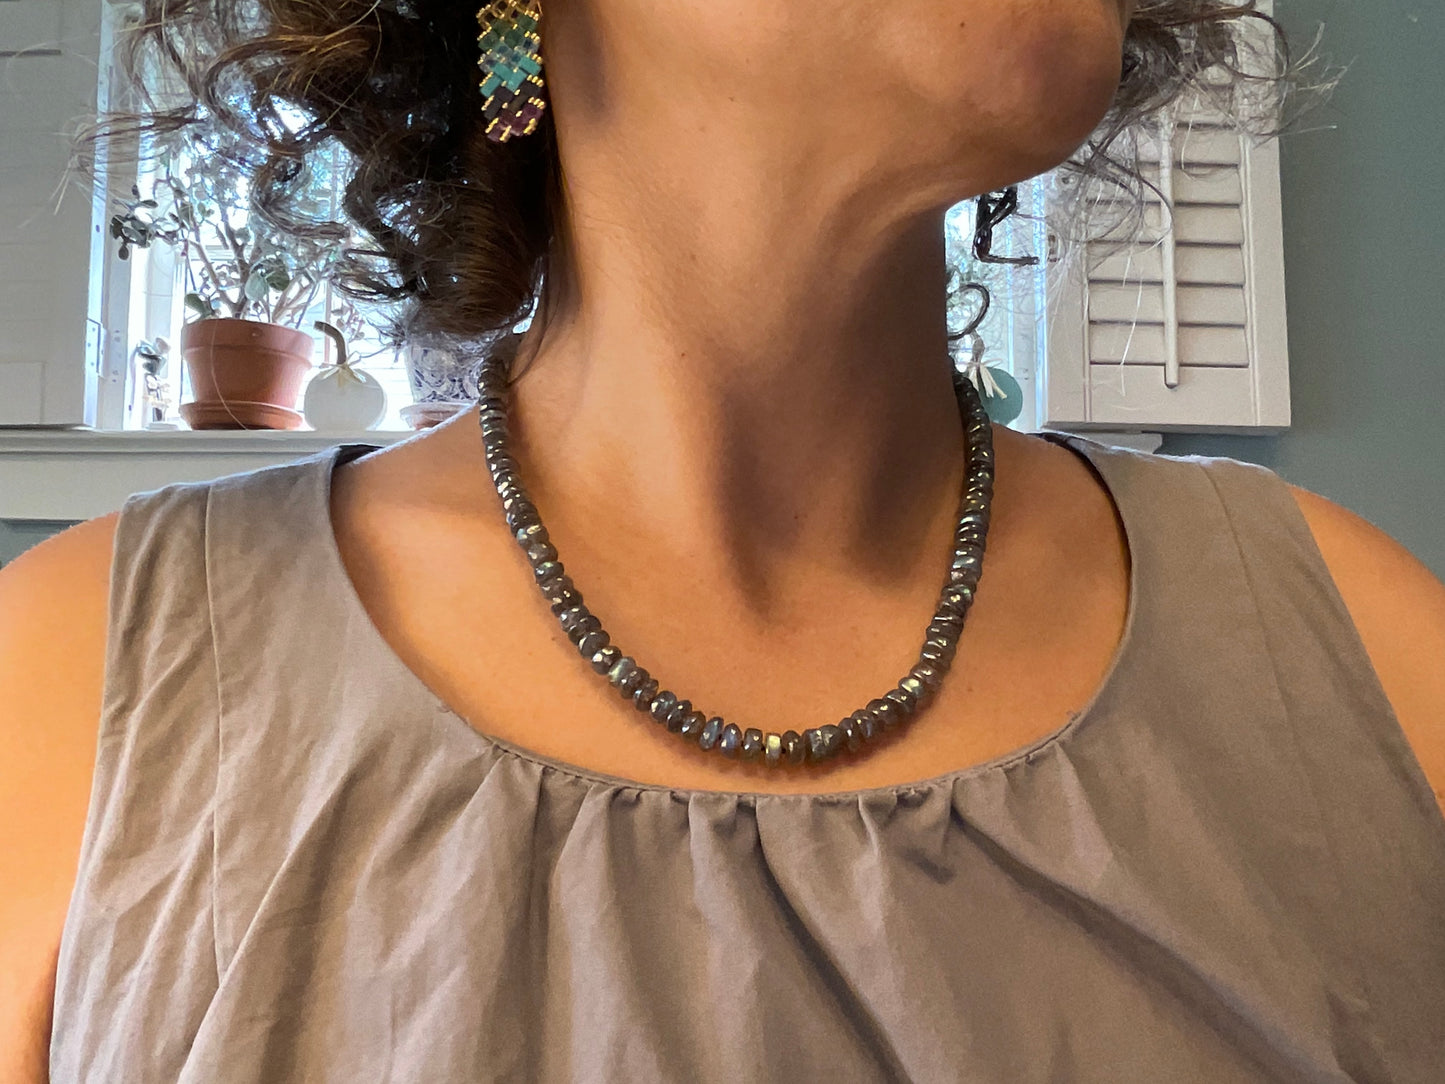 Labradorite Hand-knotted Necklace